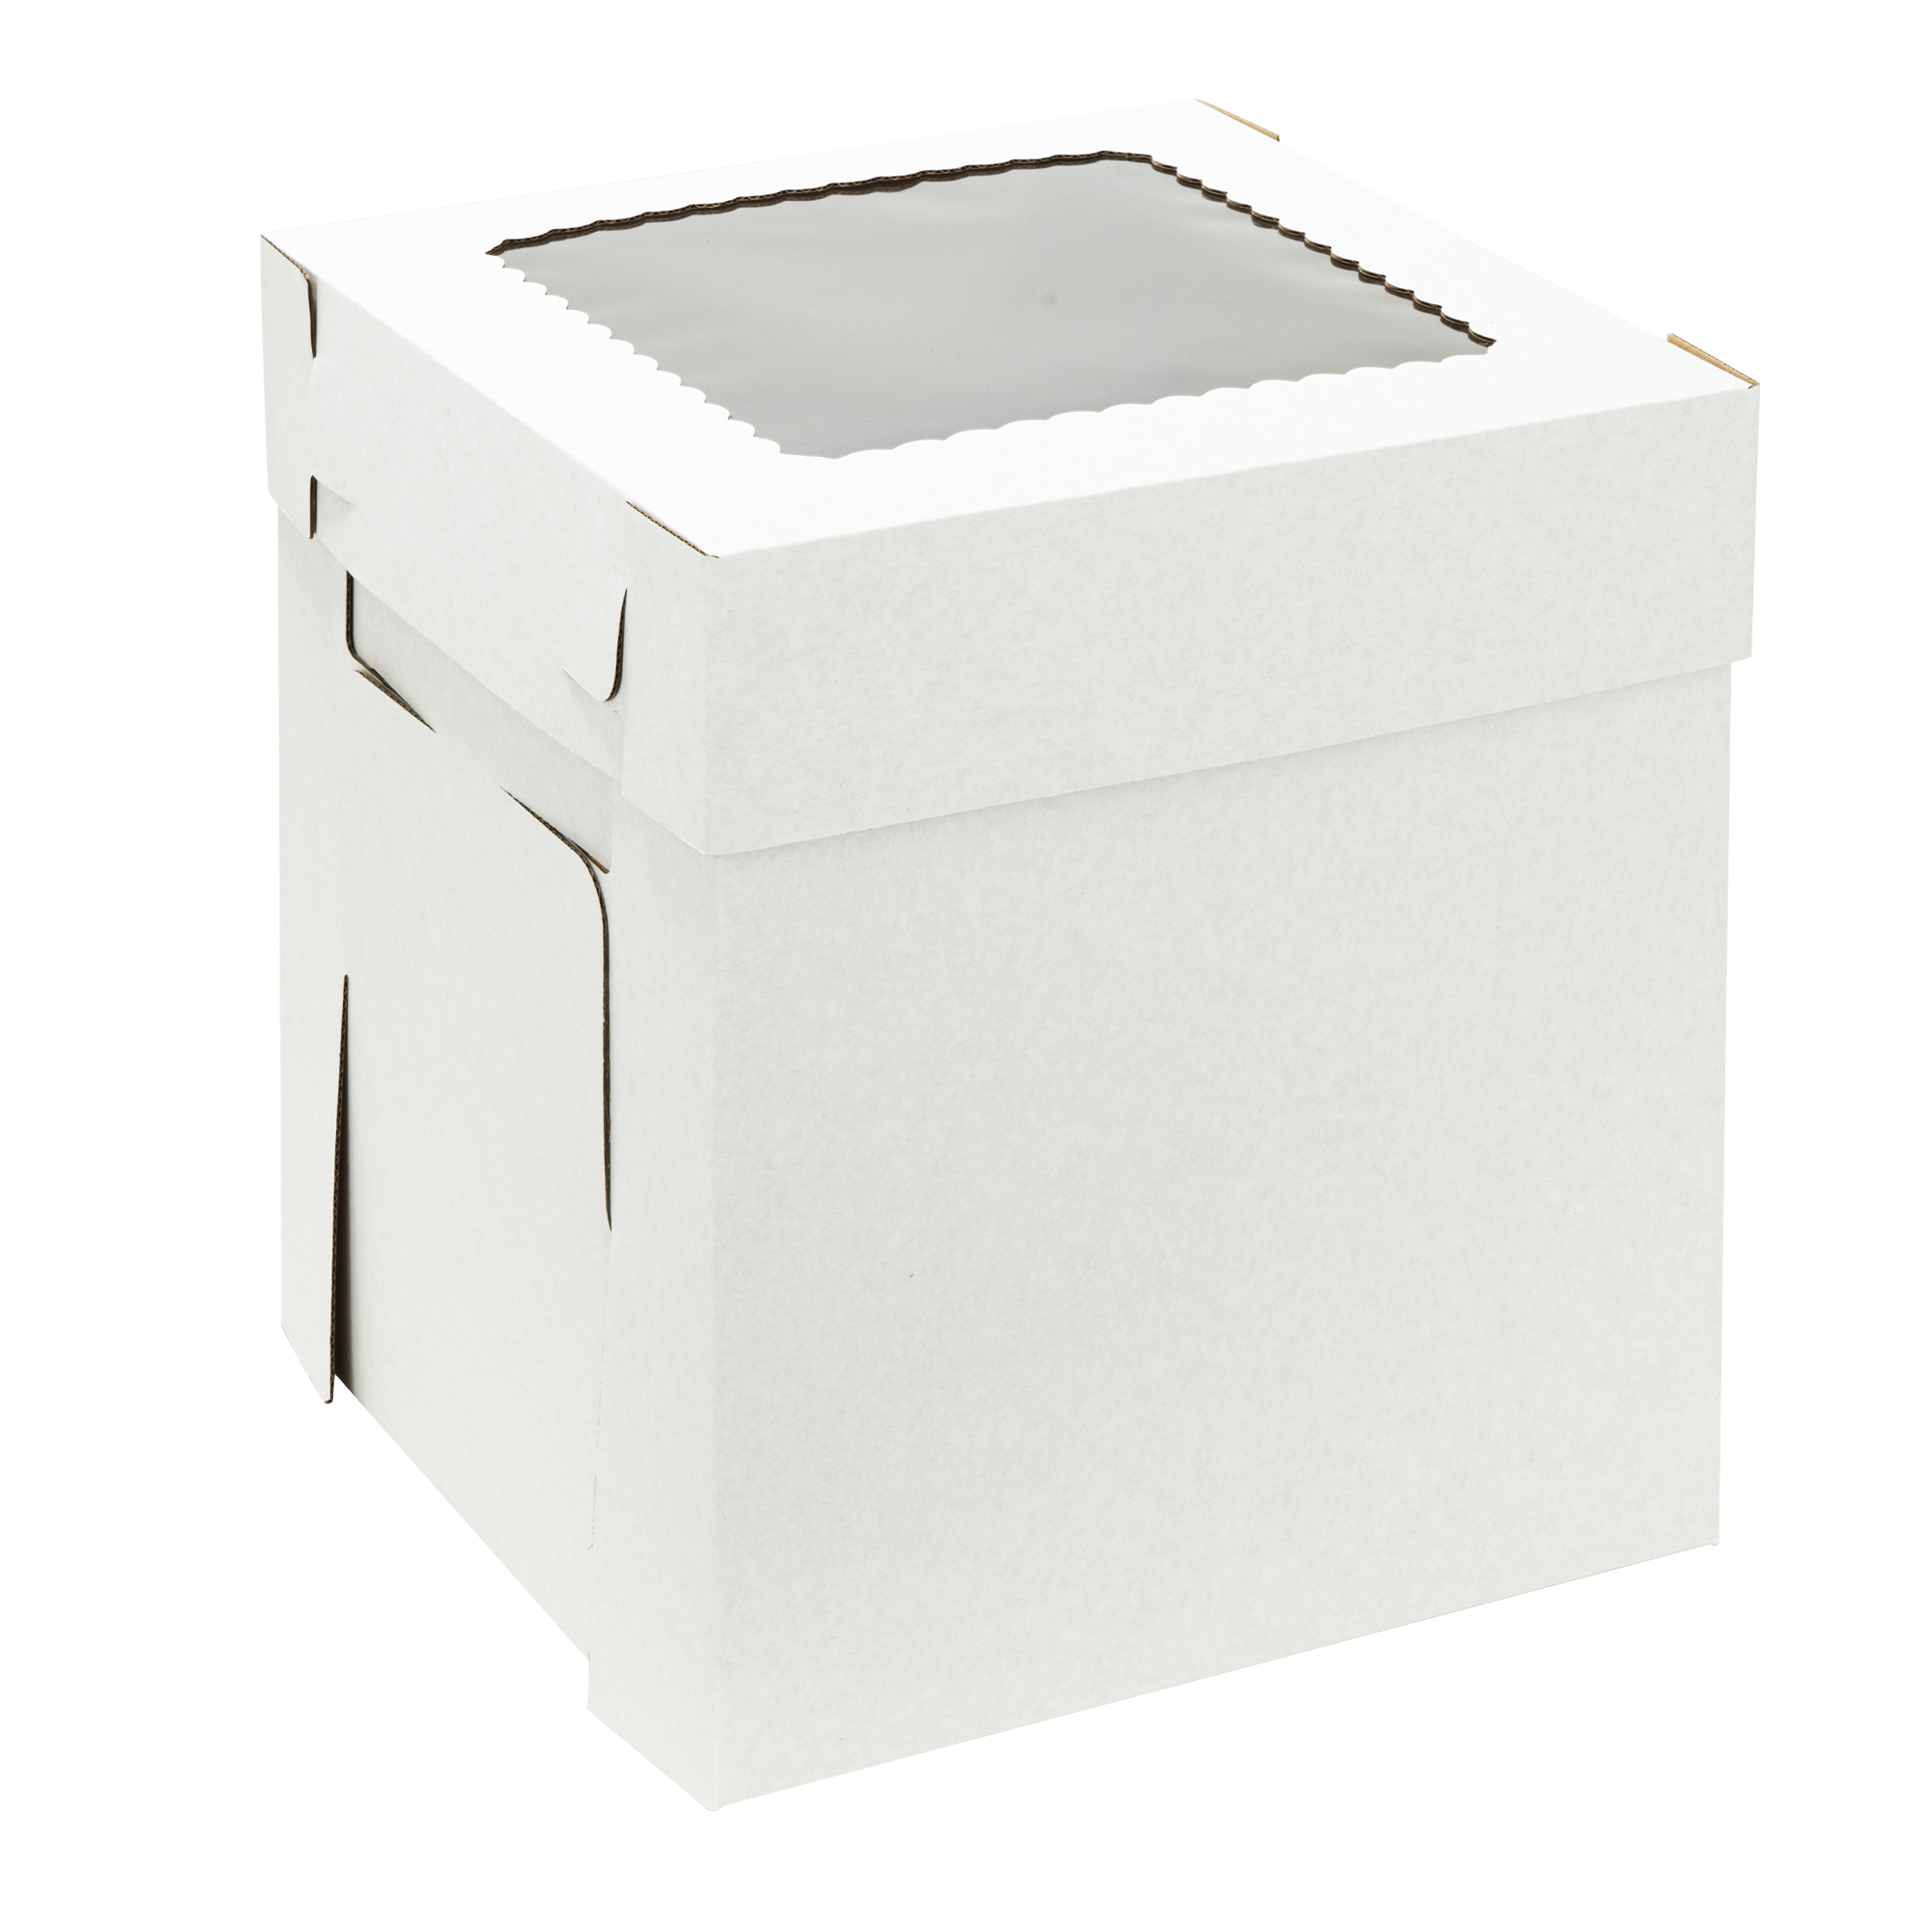 Corrugated 2-Piece Bakery Box With Window Lid 8" 25pc/pack - White